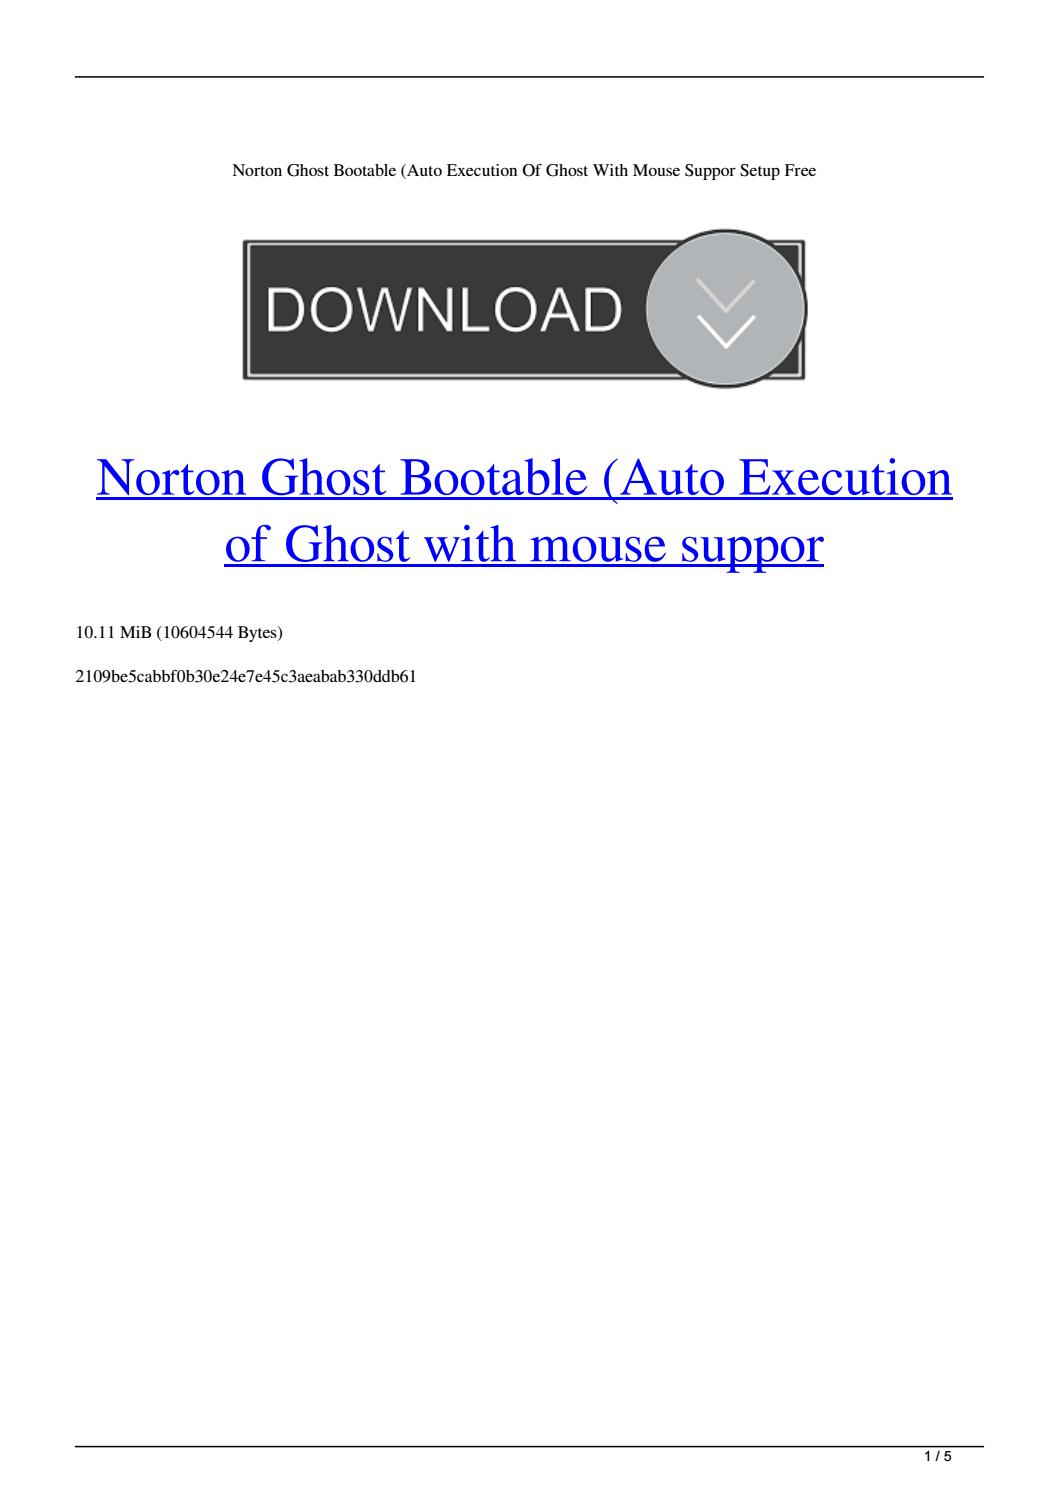 Norton Ghost 11.5 Bootable Usb Download